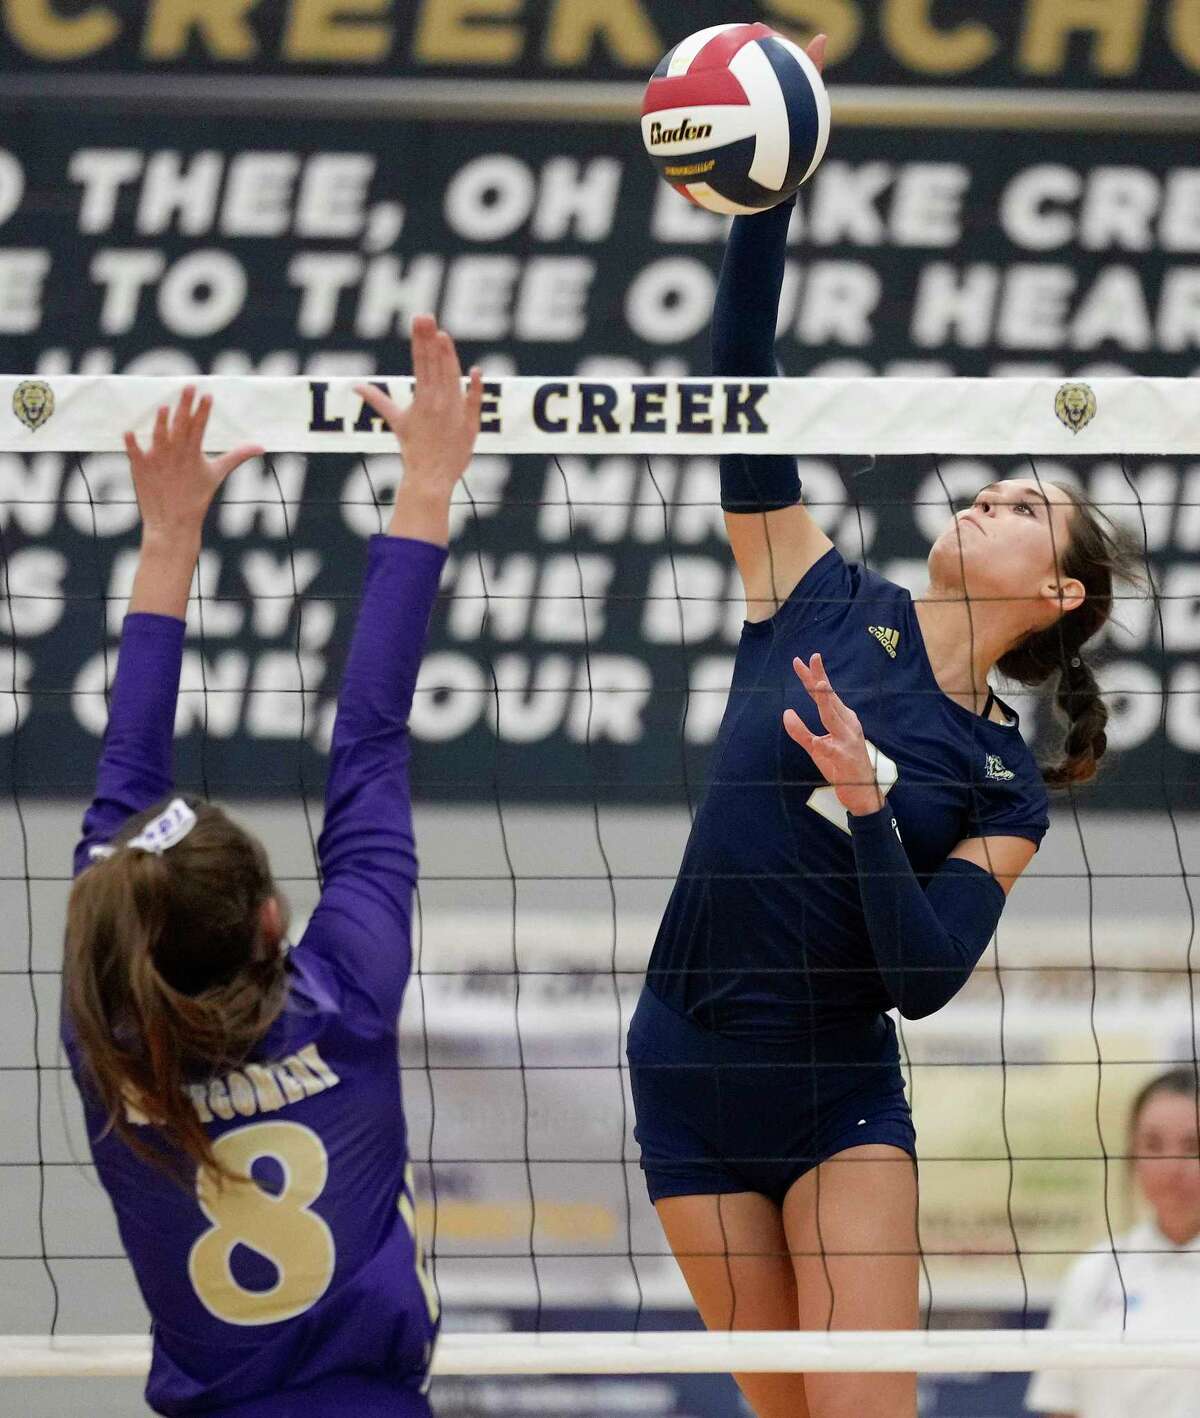 Lake Creek’s Ashlynn Kilgore, right, spikes the ball as Montgomery’s Abby Whitehead defends during a high school volleyball match, Tuesday, Sept. 13, 2022, in Montgomery, TX.